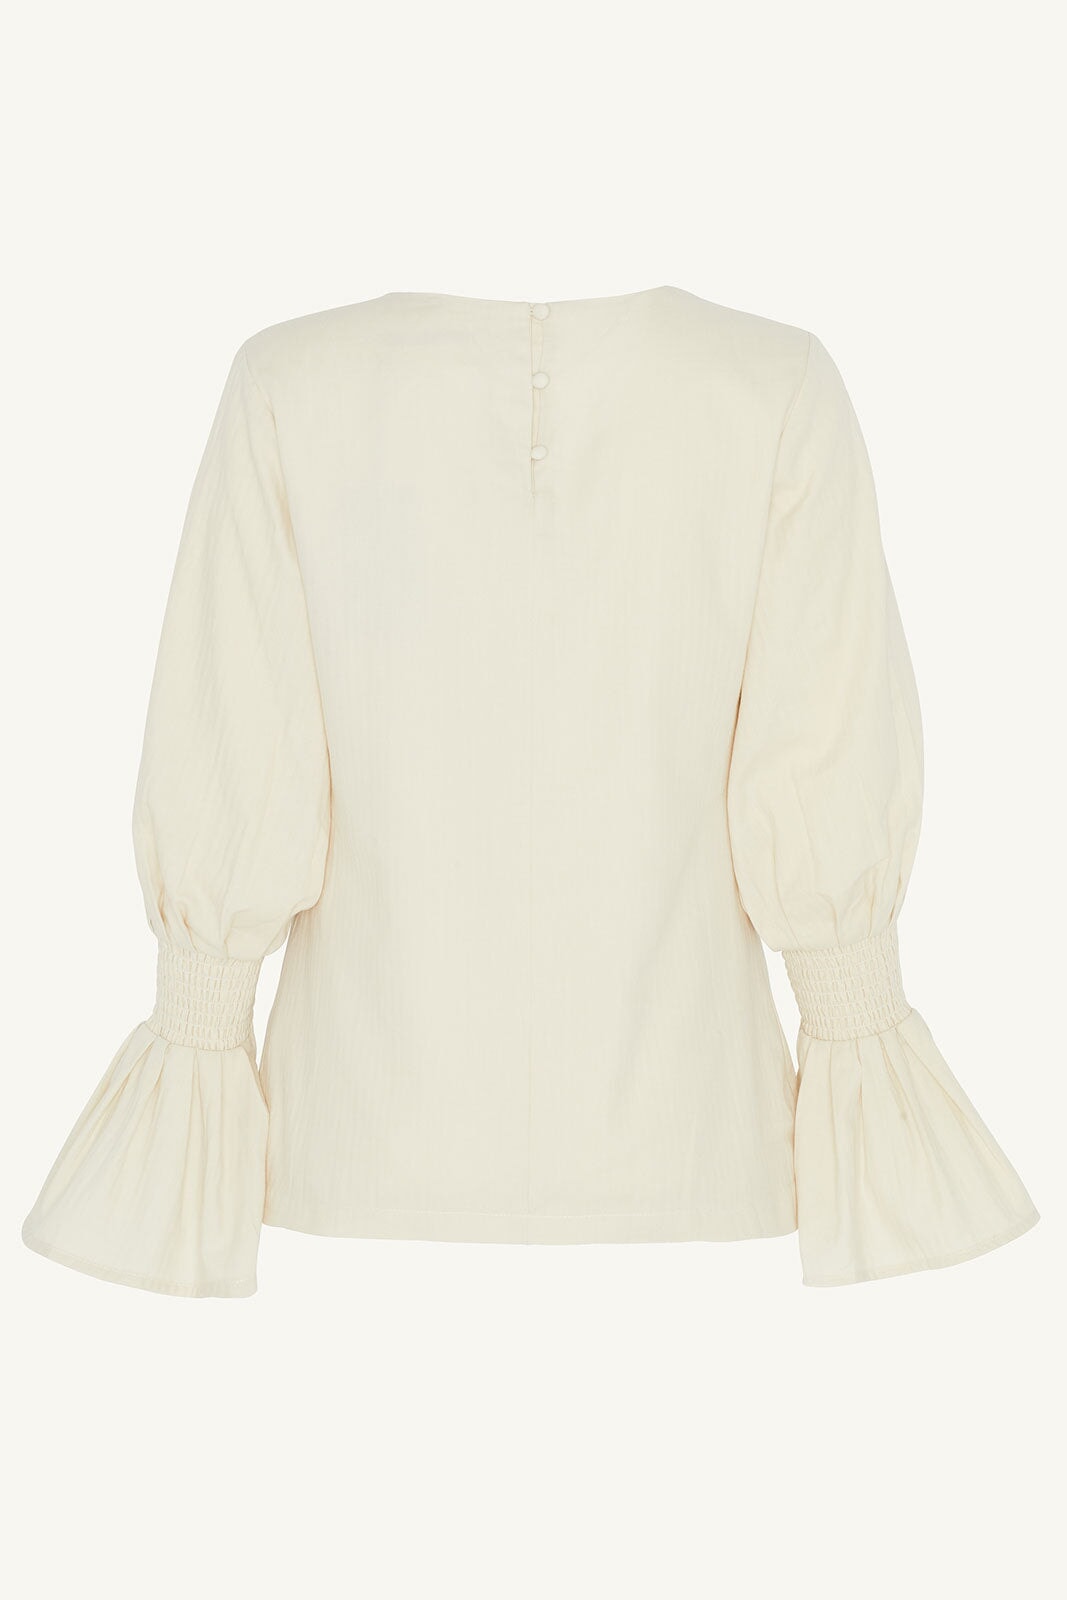 Bea Bell Sleeve Top - Off White Clothing epschoolboard 